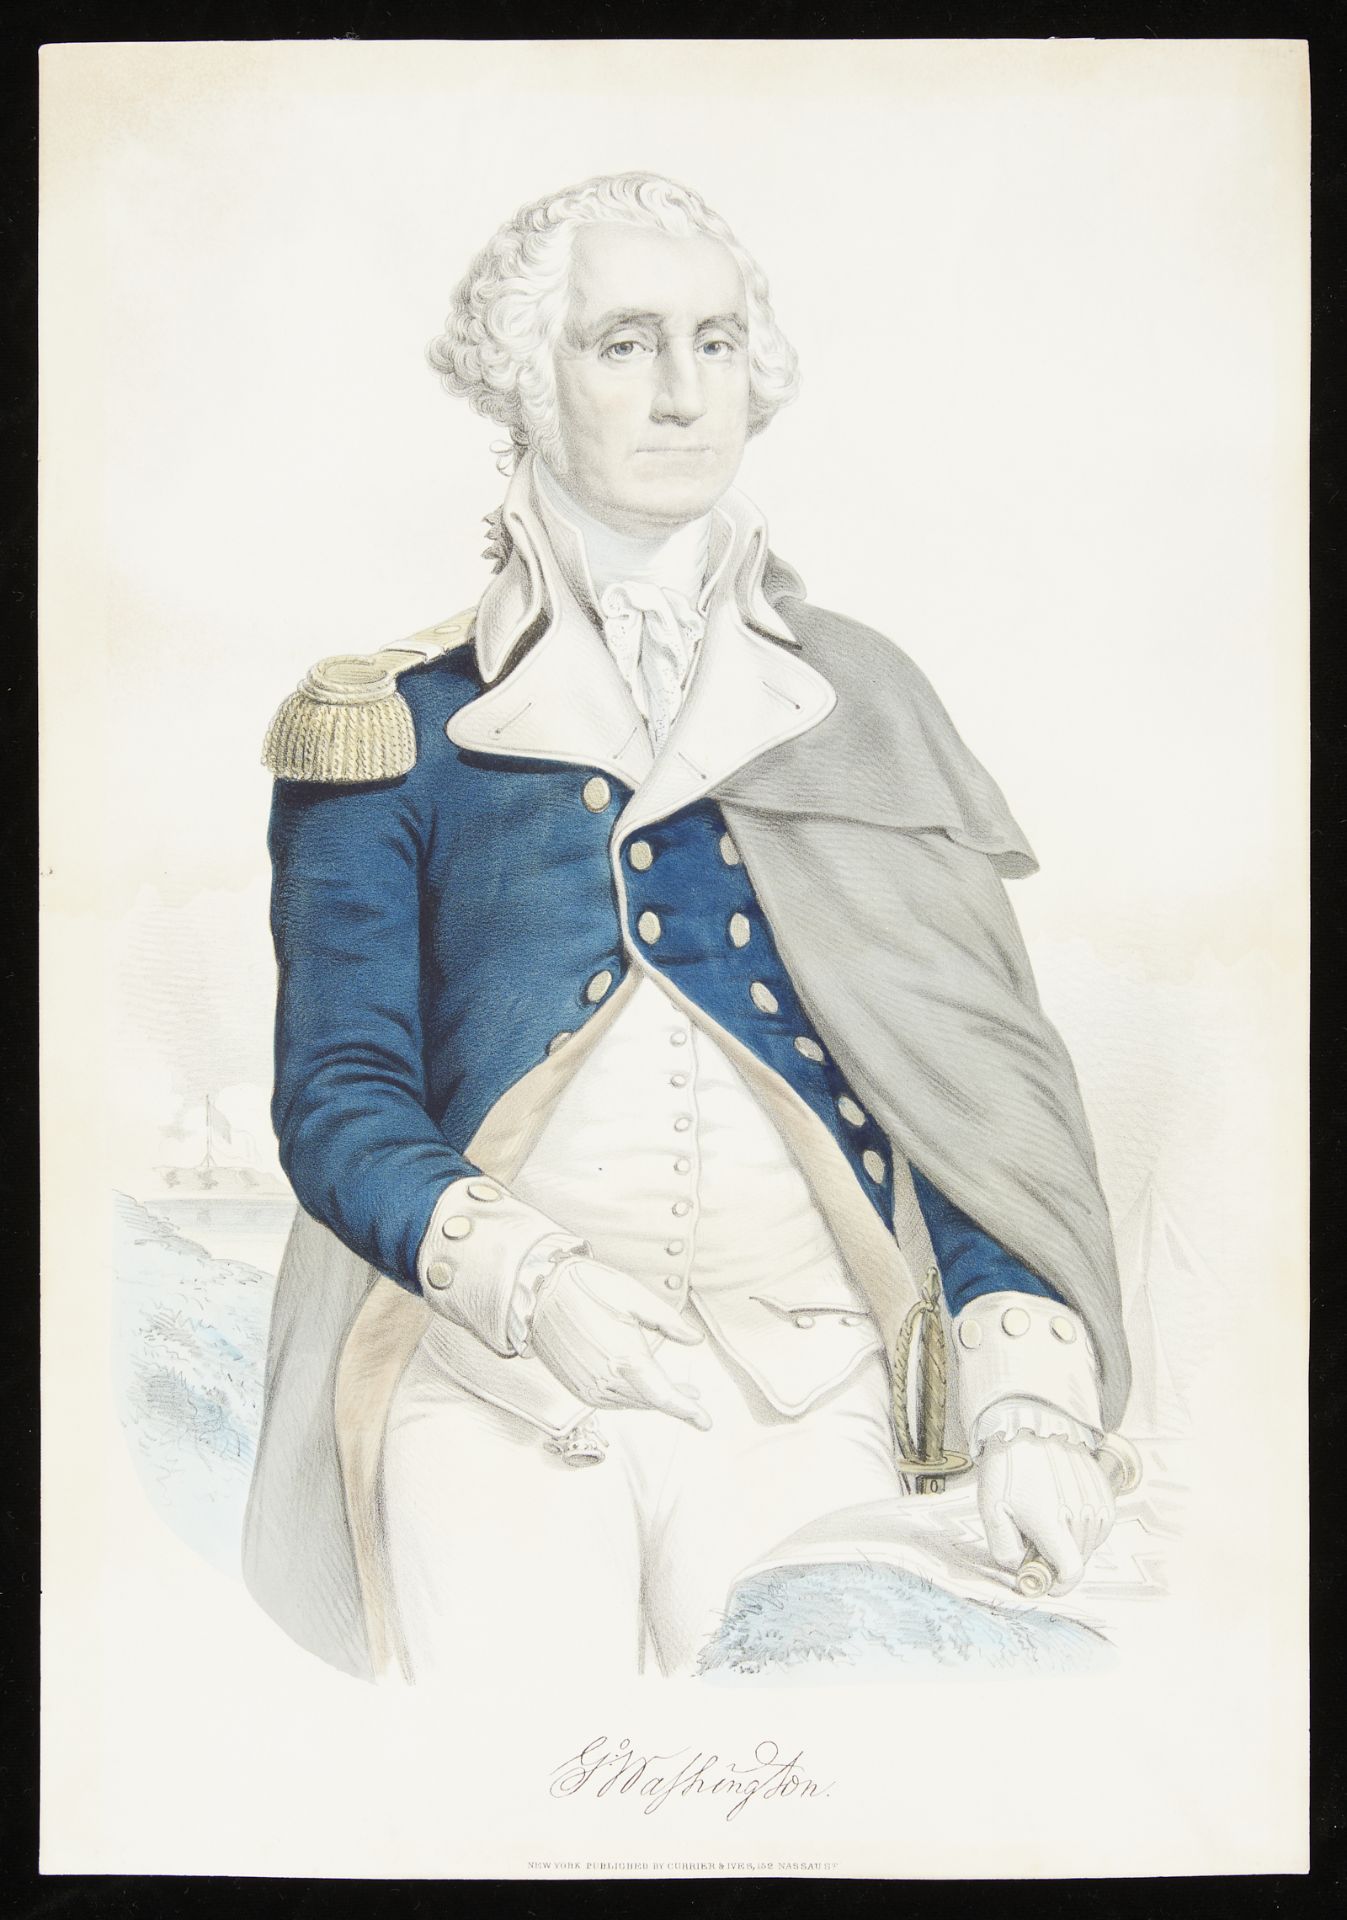 Currier & Ives "George Washington" Small Print - Image 3 of 6